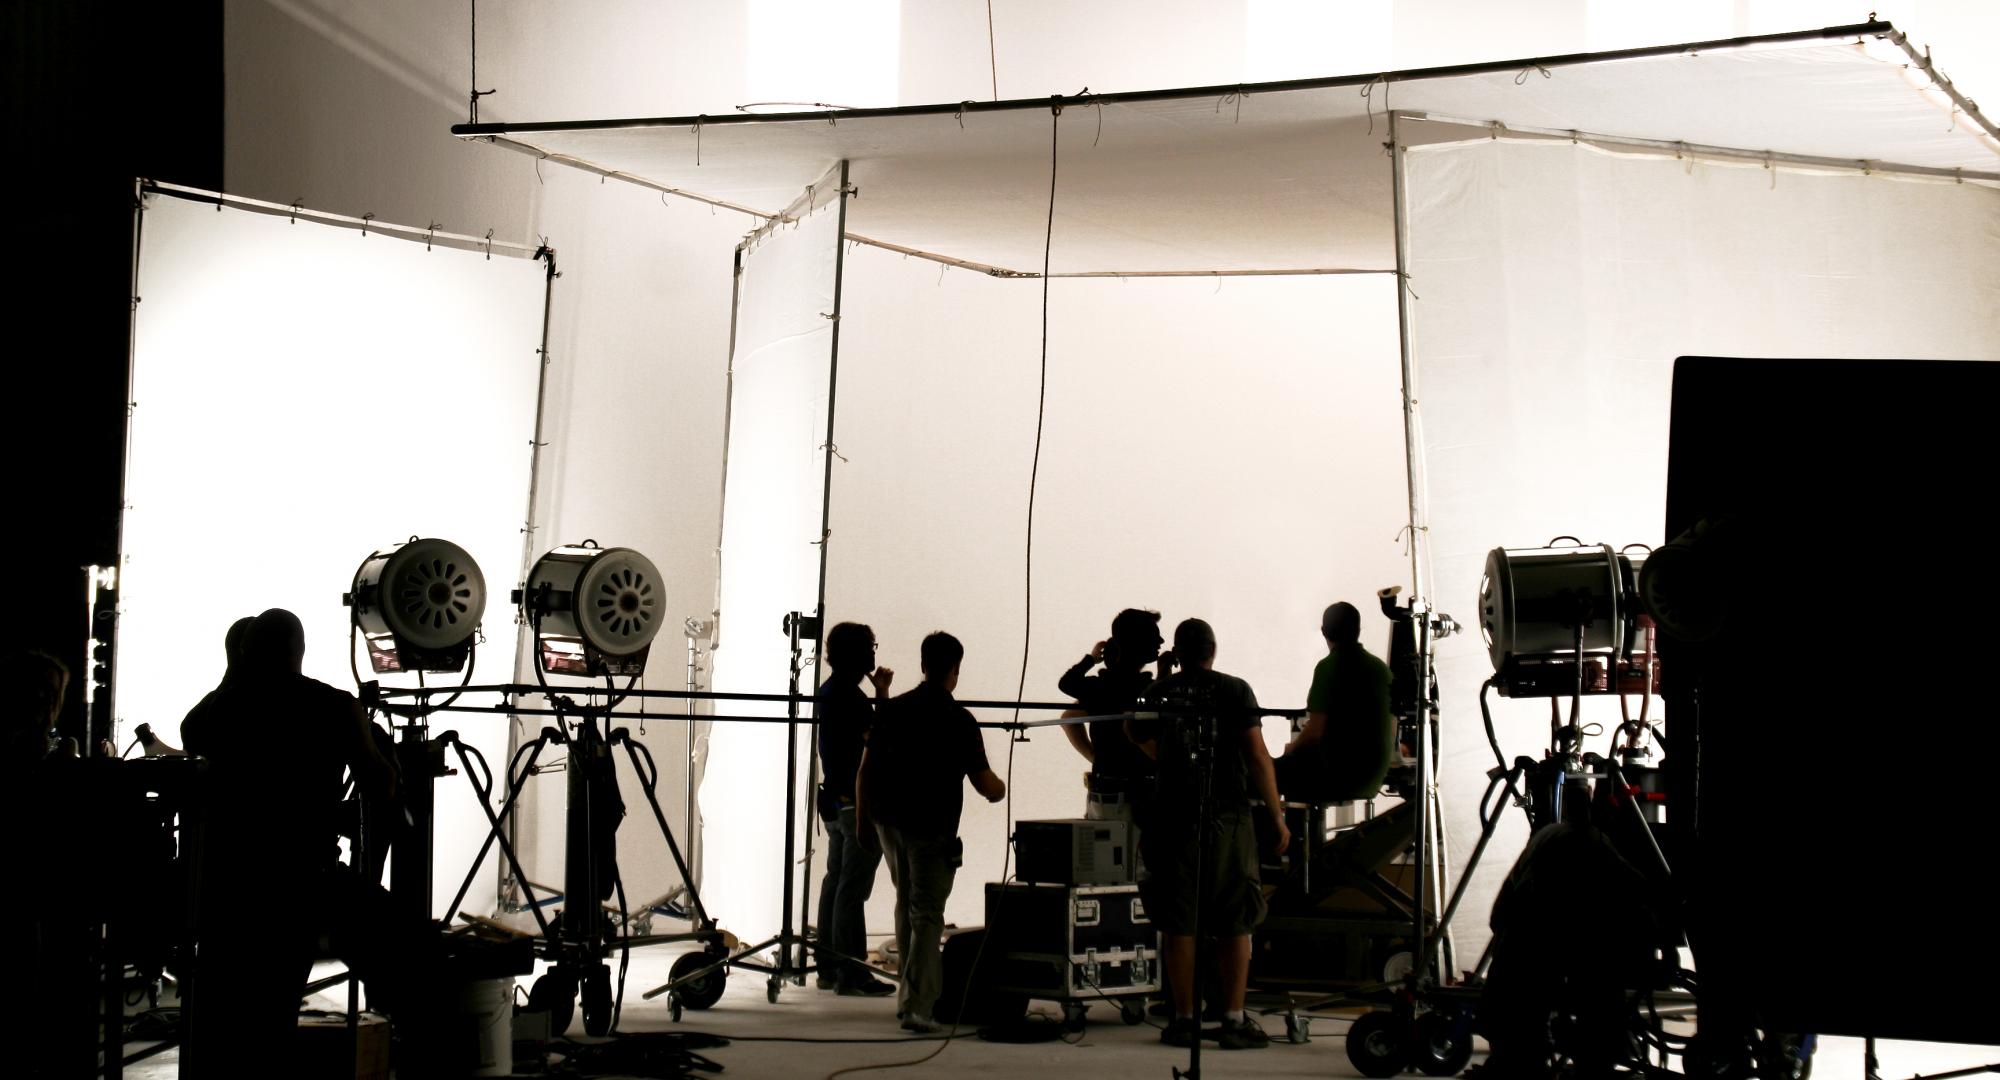 Television commercial production set